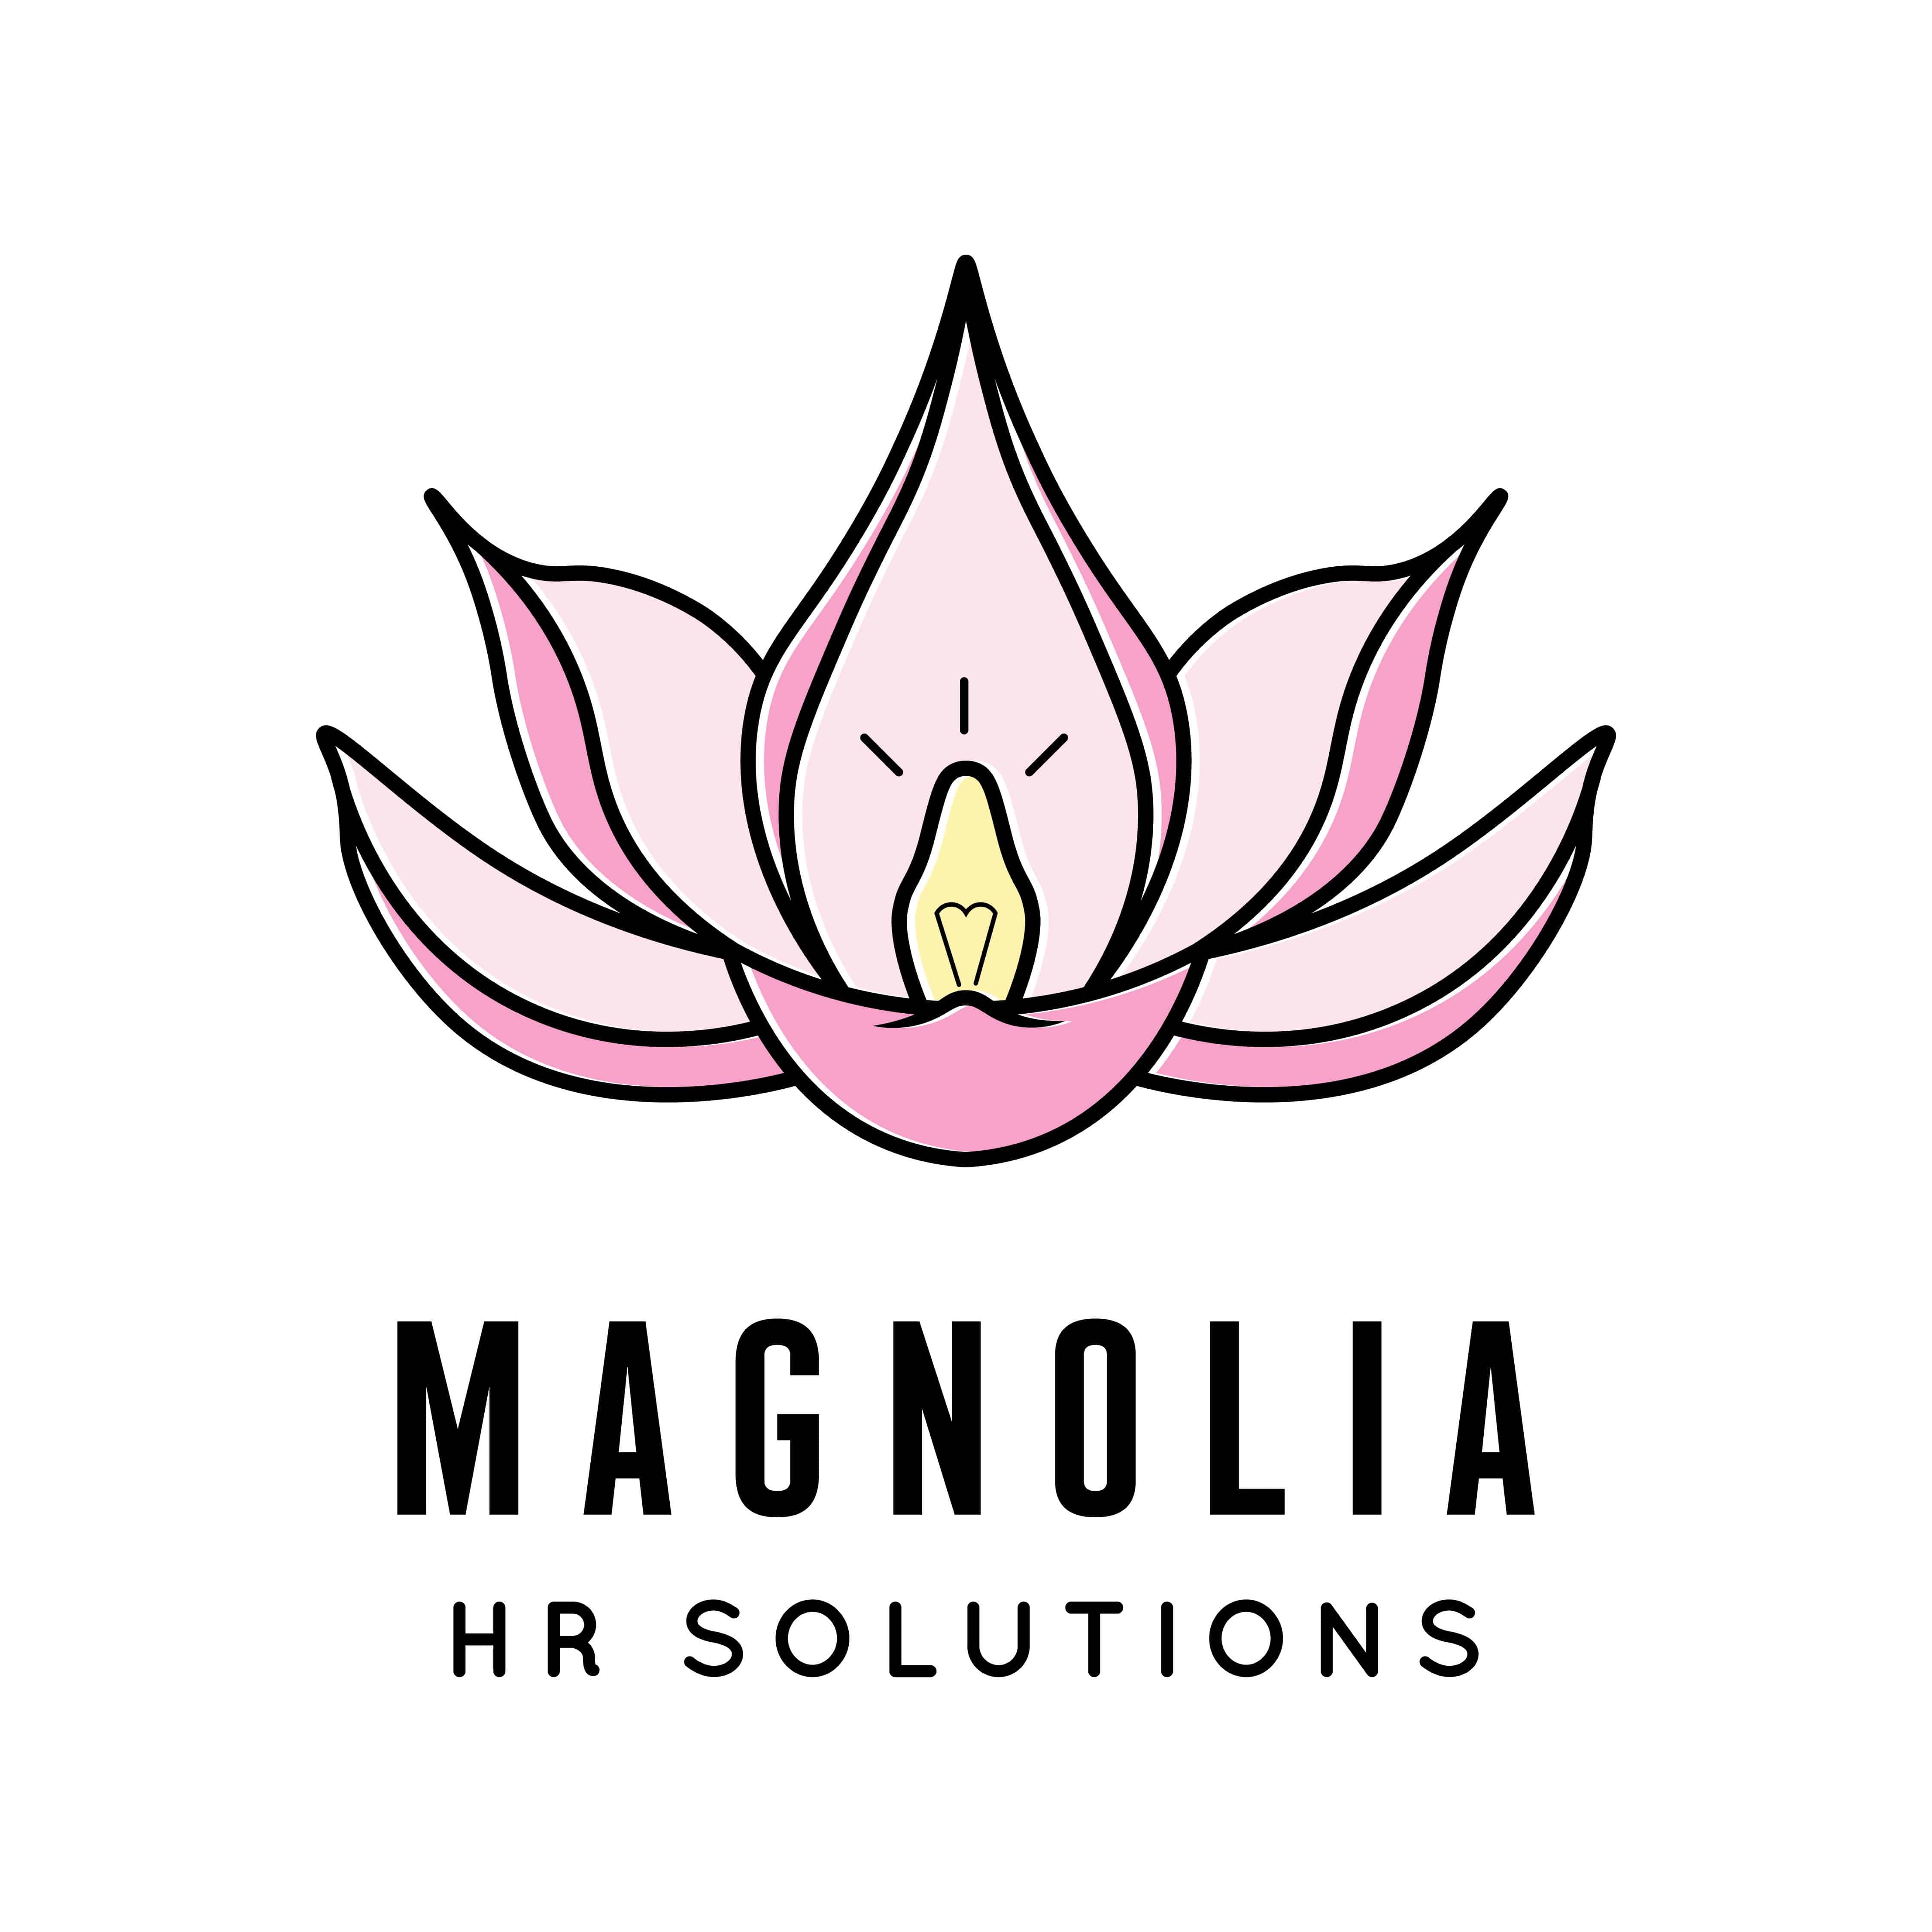 Magnolia HR Solutions. Assist with transition from military to civilian, resumes, job applications, and employee human resource related processes. 